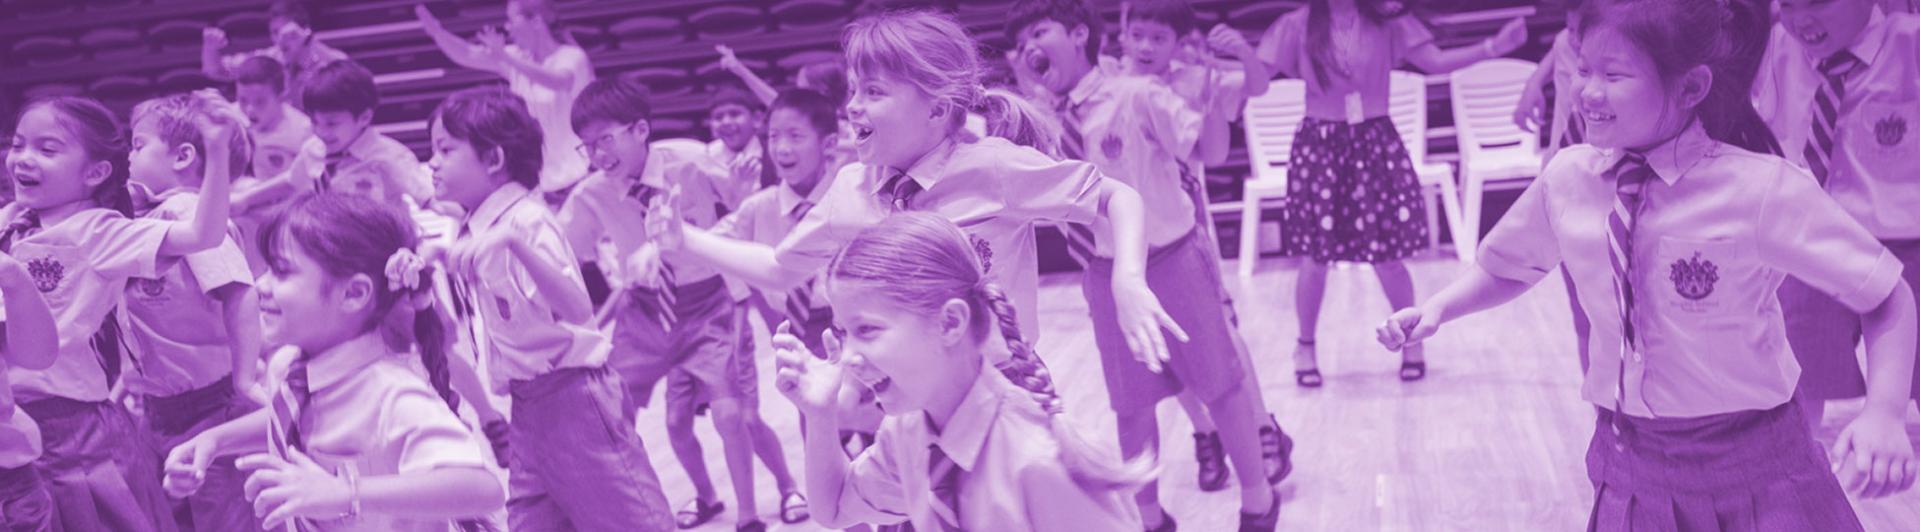 Purple and white image of kids dancing